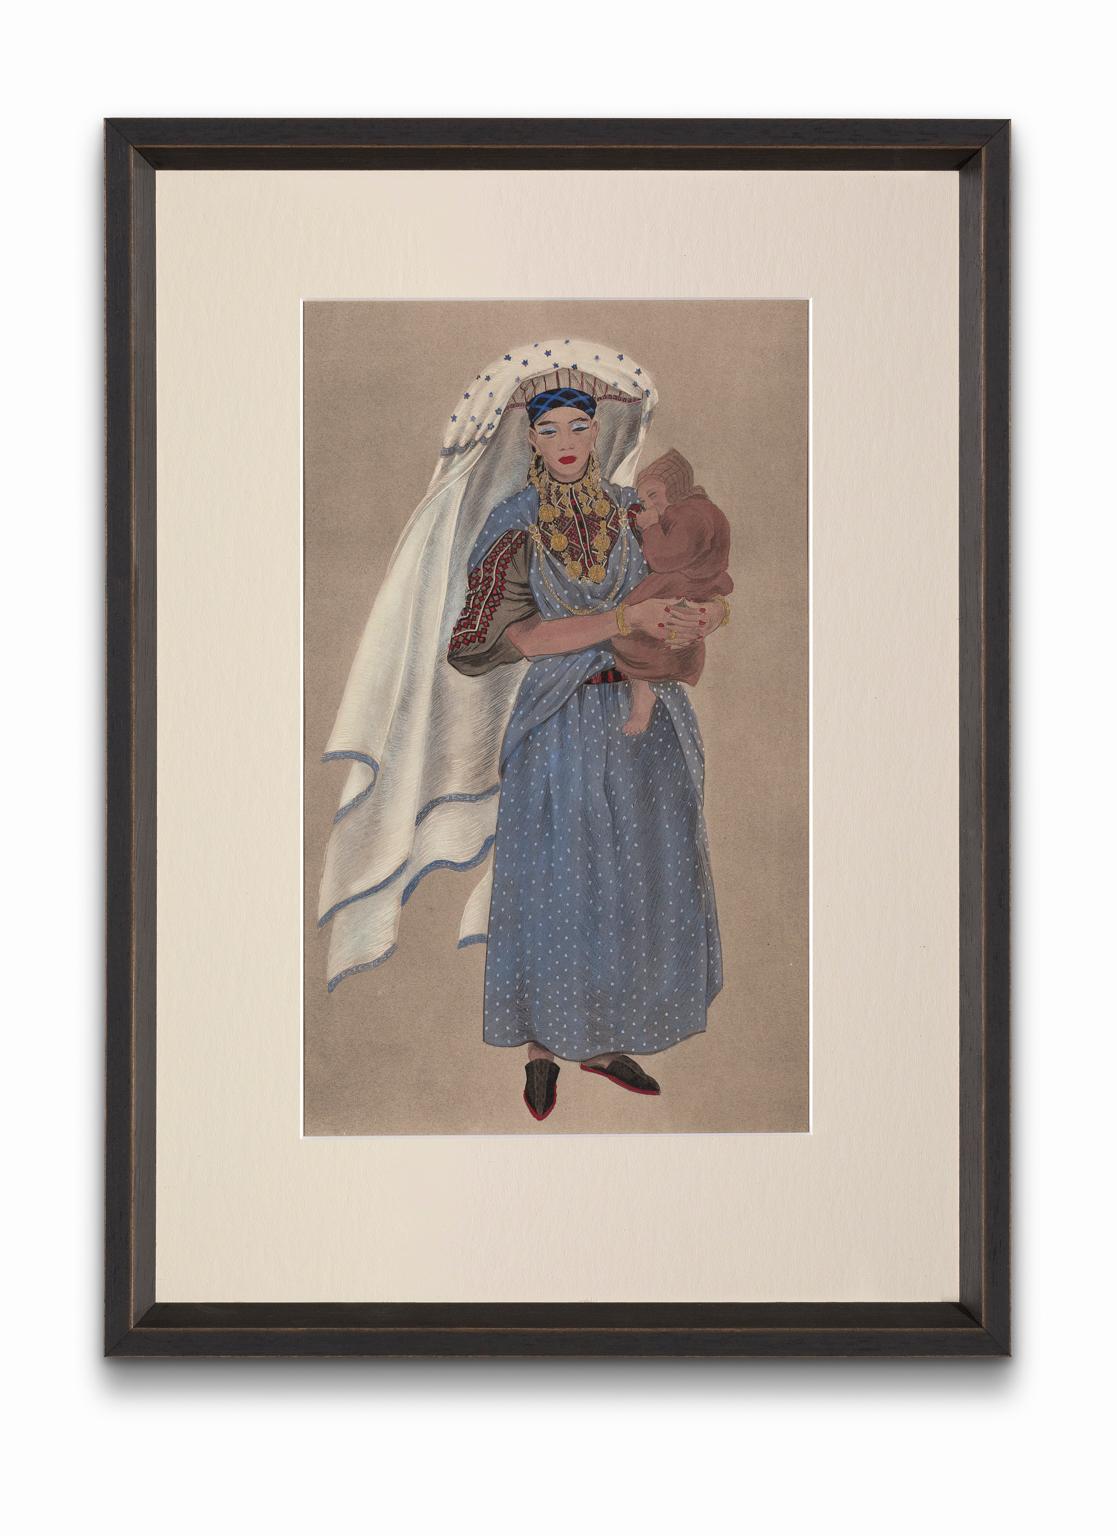 Jean Besancenot Portrait Print - "Jewish Woman of the Tafilelt" from "Costumes of Morocco", Gouache on Paper